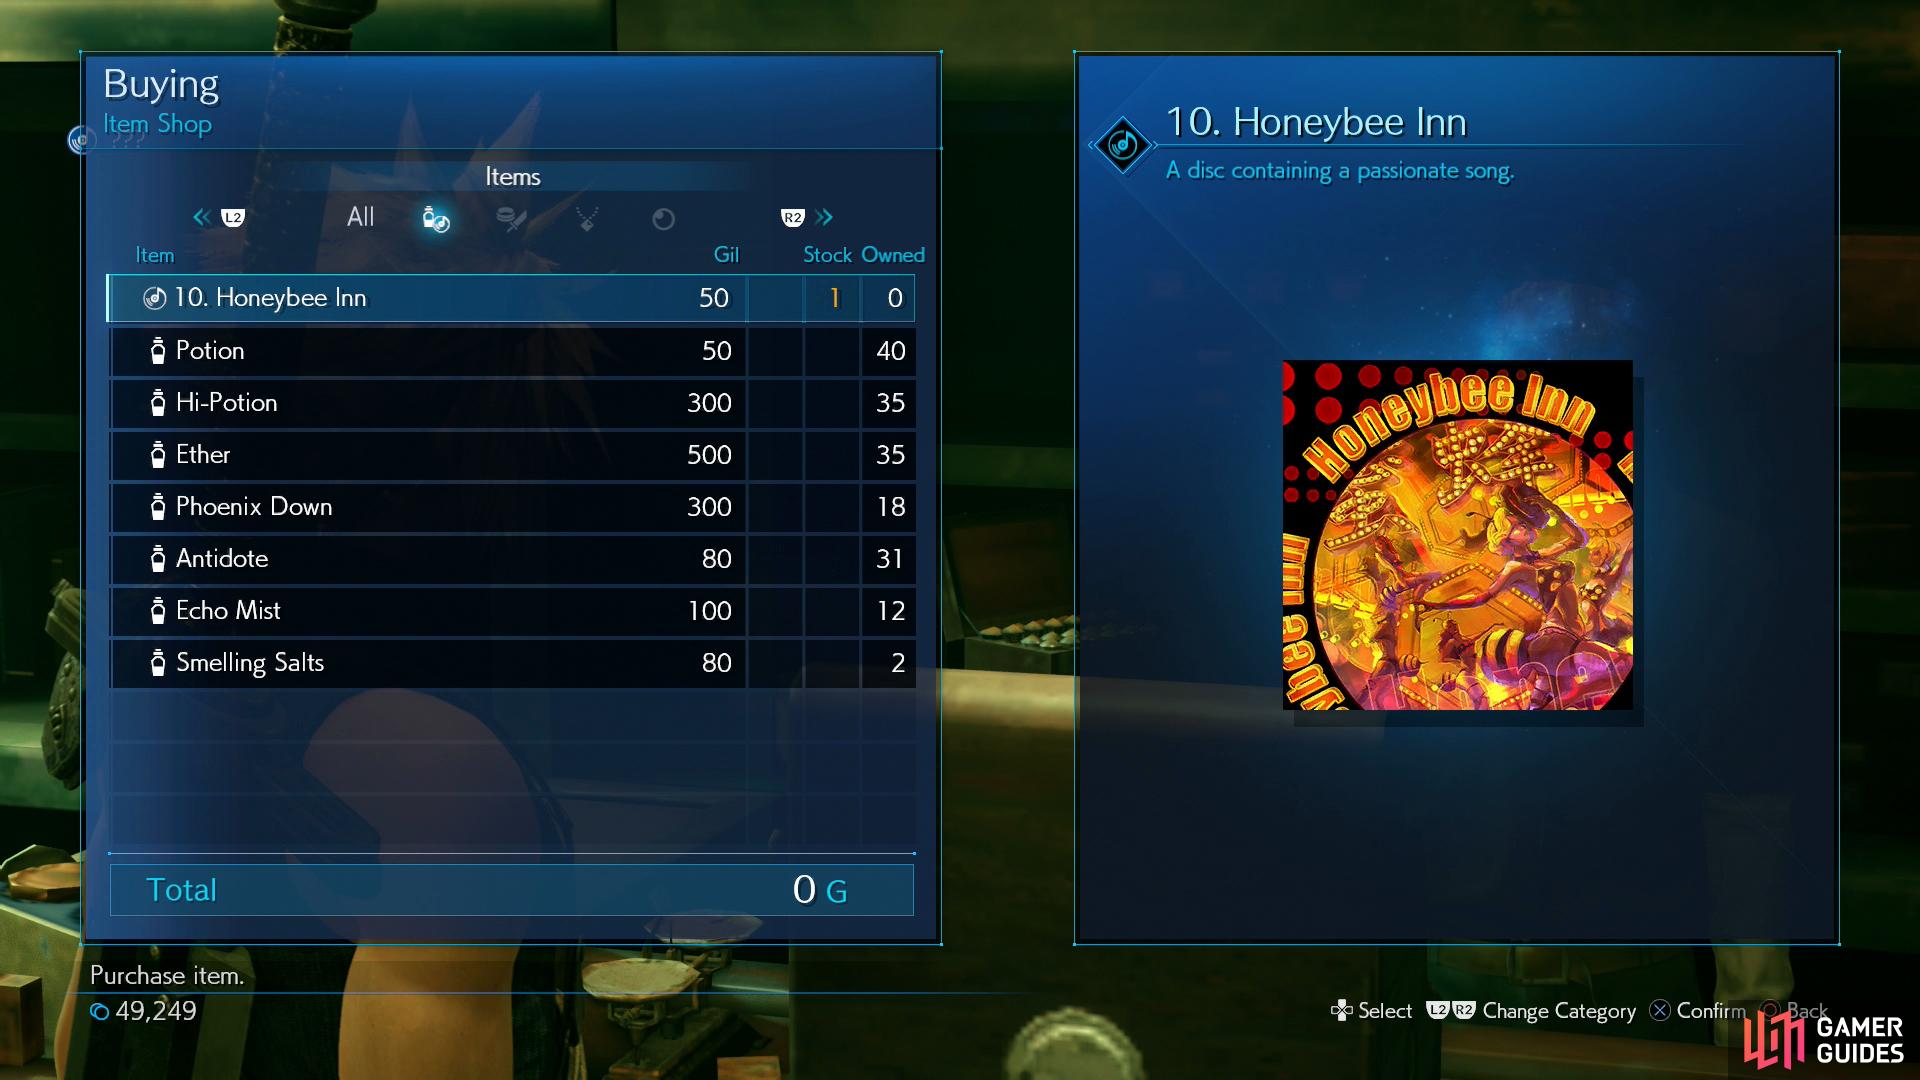 You can also buy the Honeybee Inn Music Disc from the item shop.